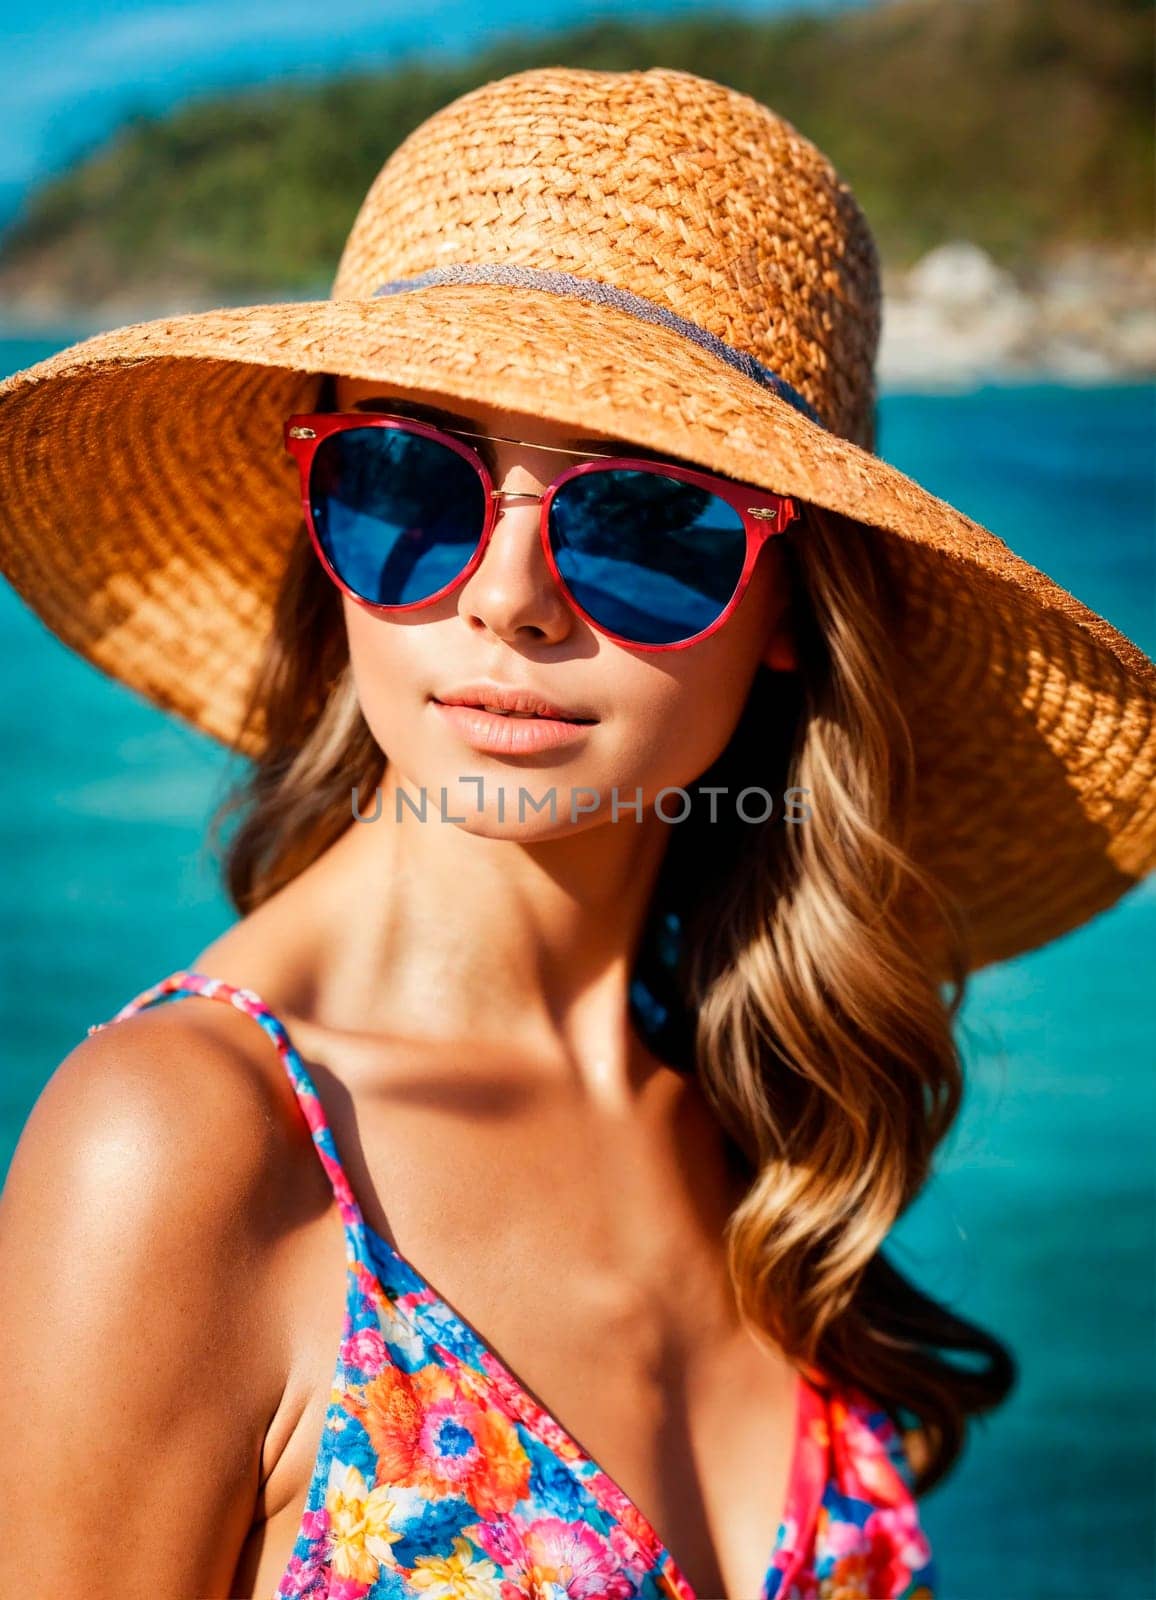 woman in a hat on a tropical beach. Selective focus. by yanadjana